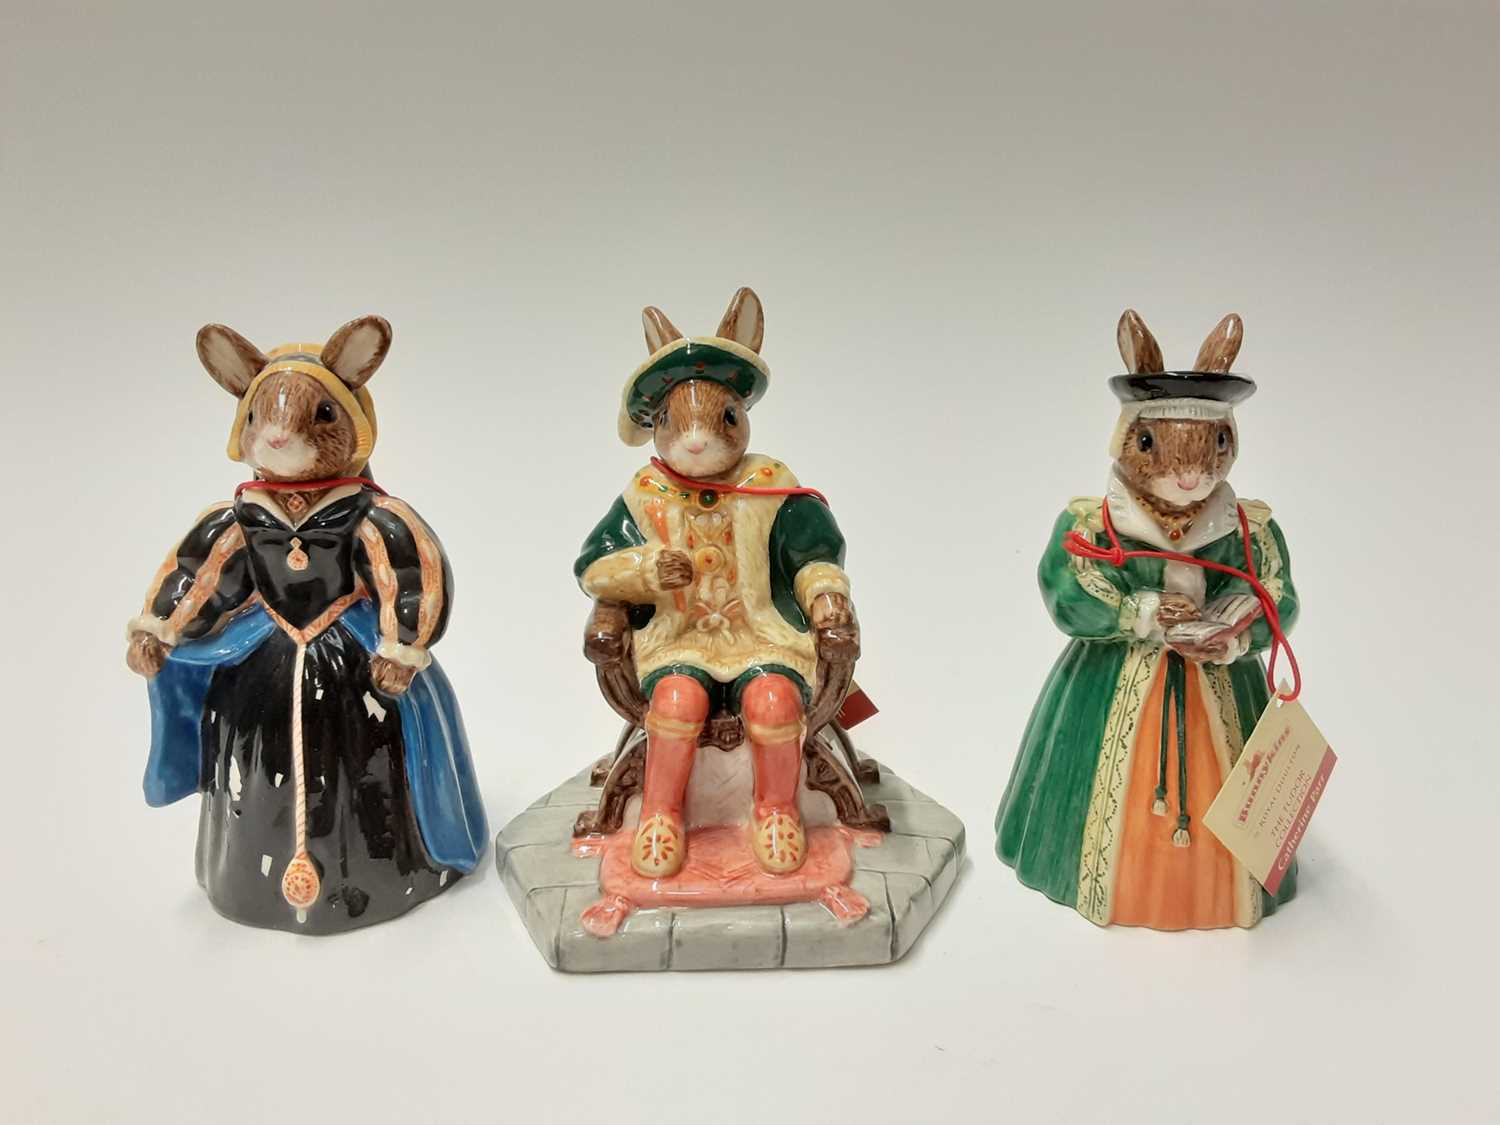 Lot 93 - Royal Doulton Bunnykins Tudor Collection base with Henry VIII DB305 and his wives Kathryn Howard DB310, Catherine Parr DB311. Anne of Cleves DB309, Anne Boleyn DB307, Jane Seymour DB308, Catherine...